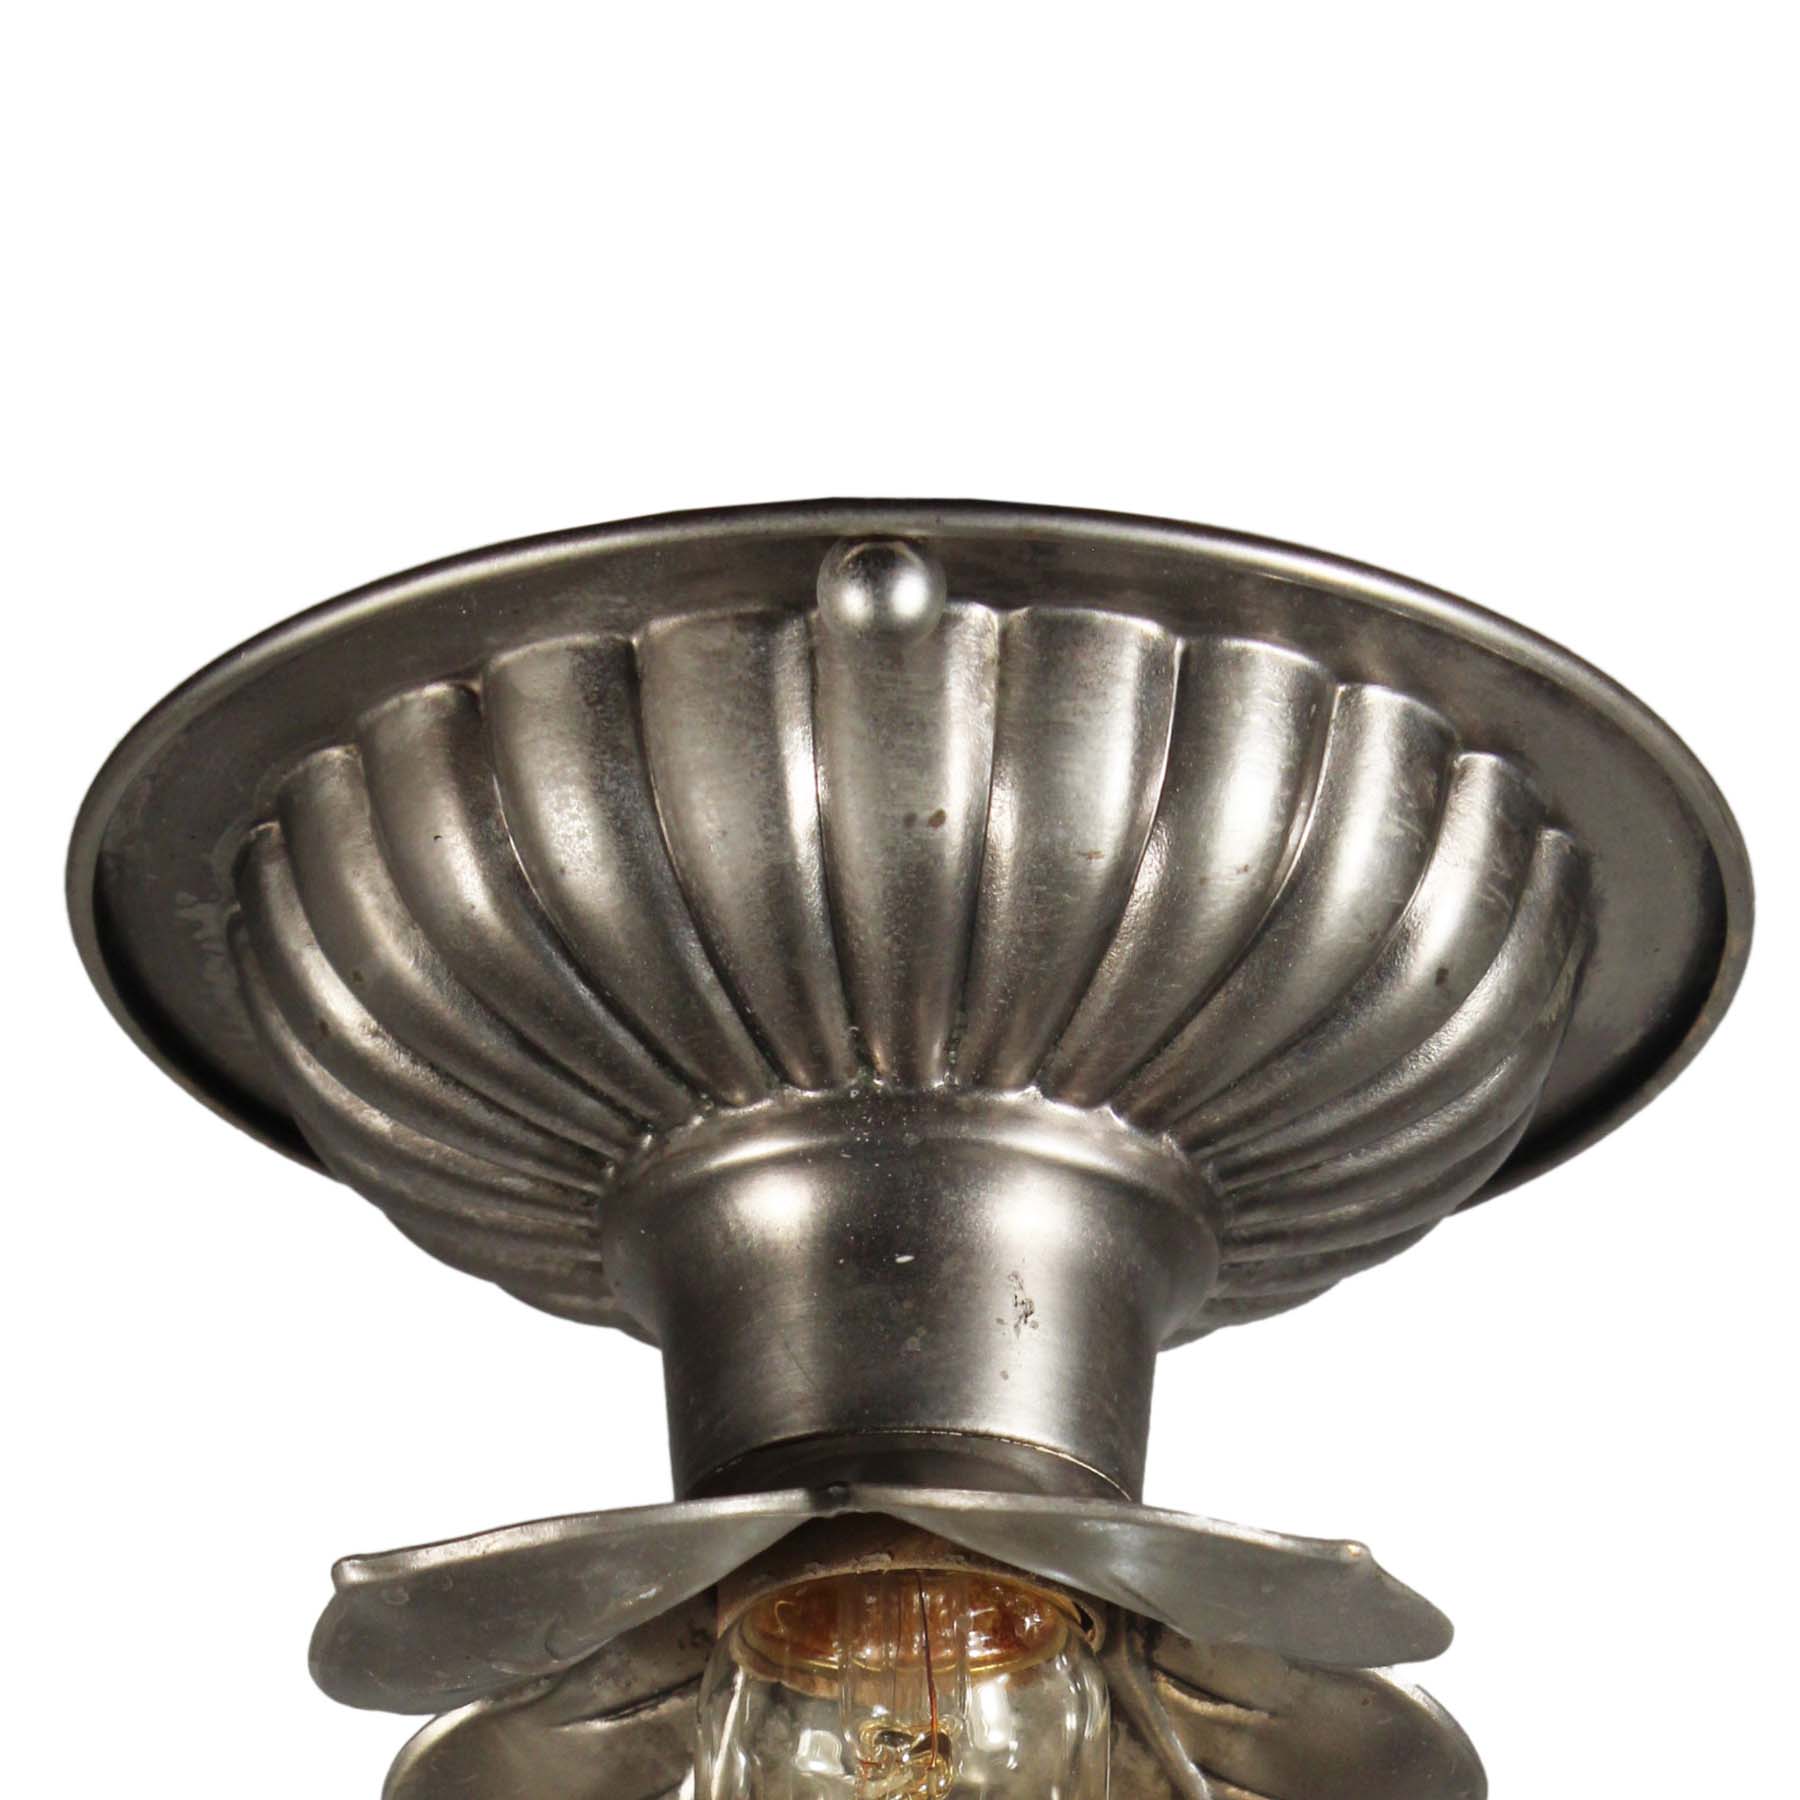 SOLD Antique Flush-Mount Lights with Exposed Bulbs-69488